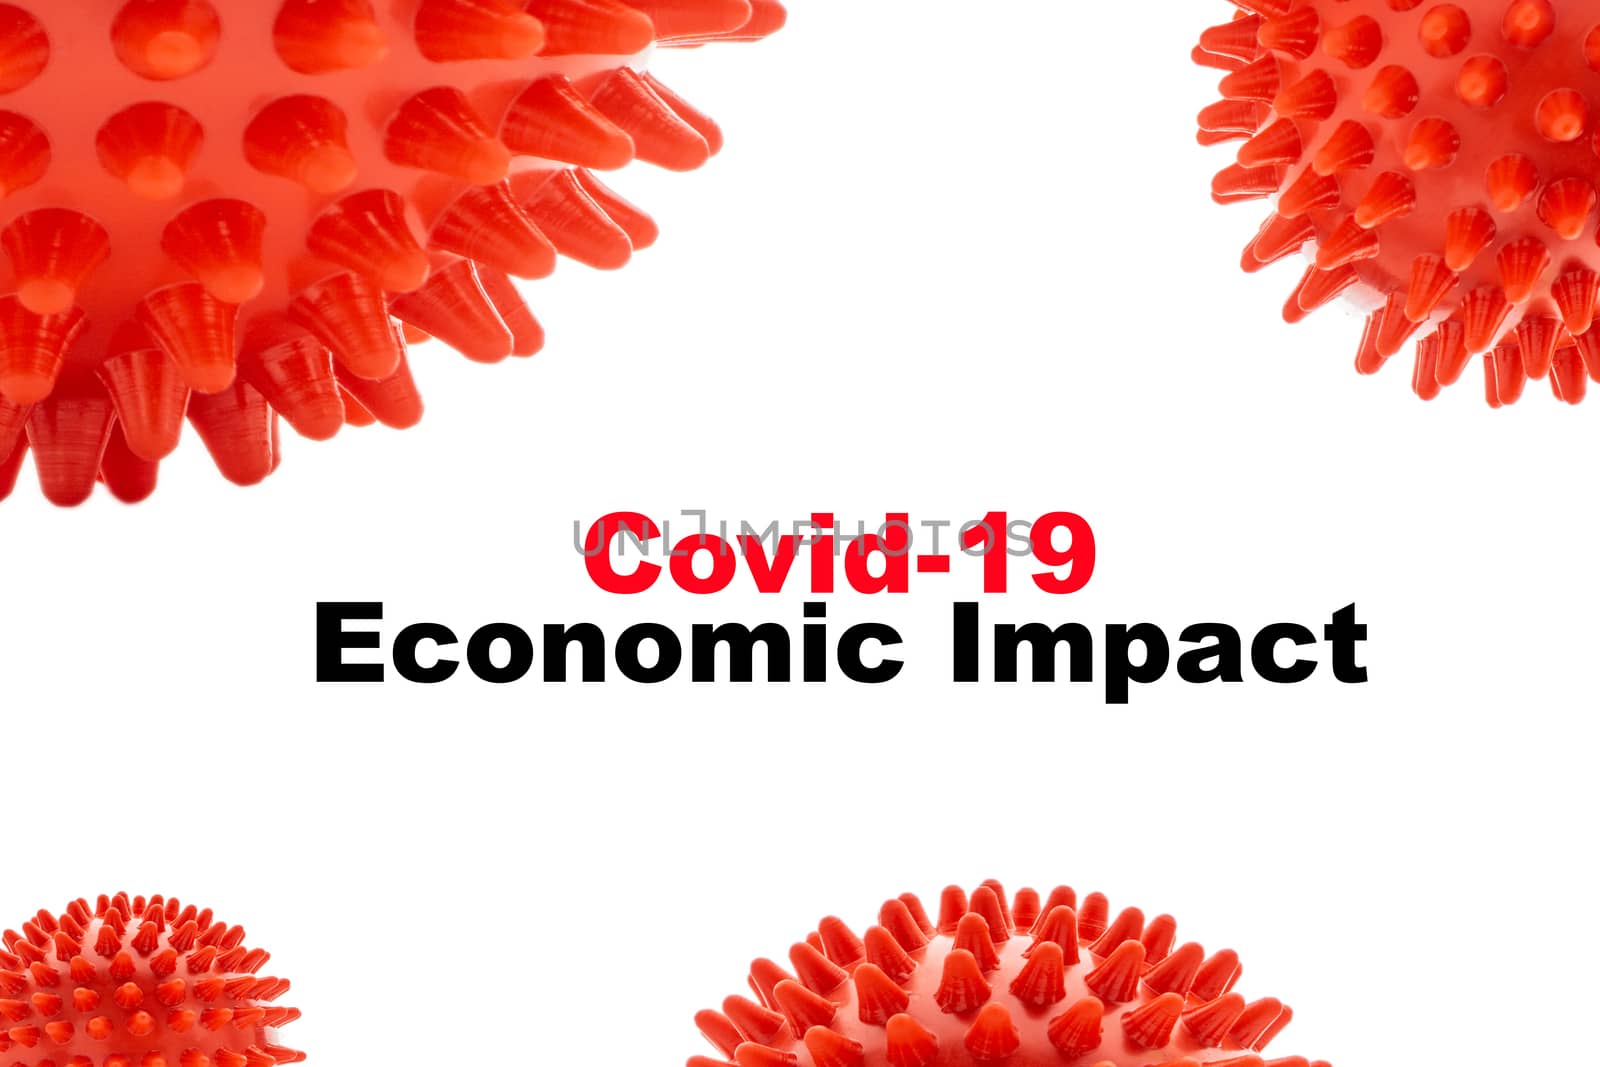 COVID-19 ECONOMIC IMPACT text on white background by silverwings